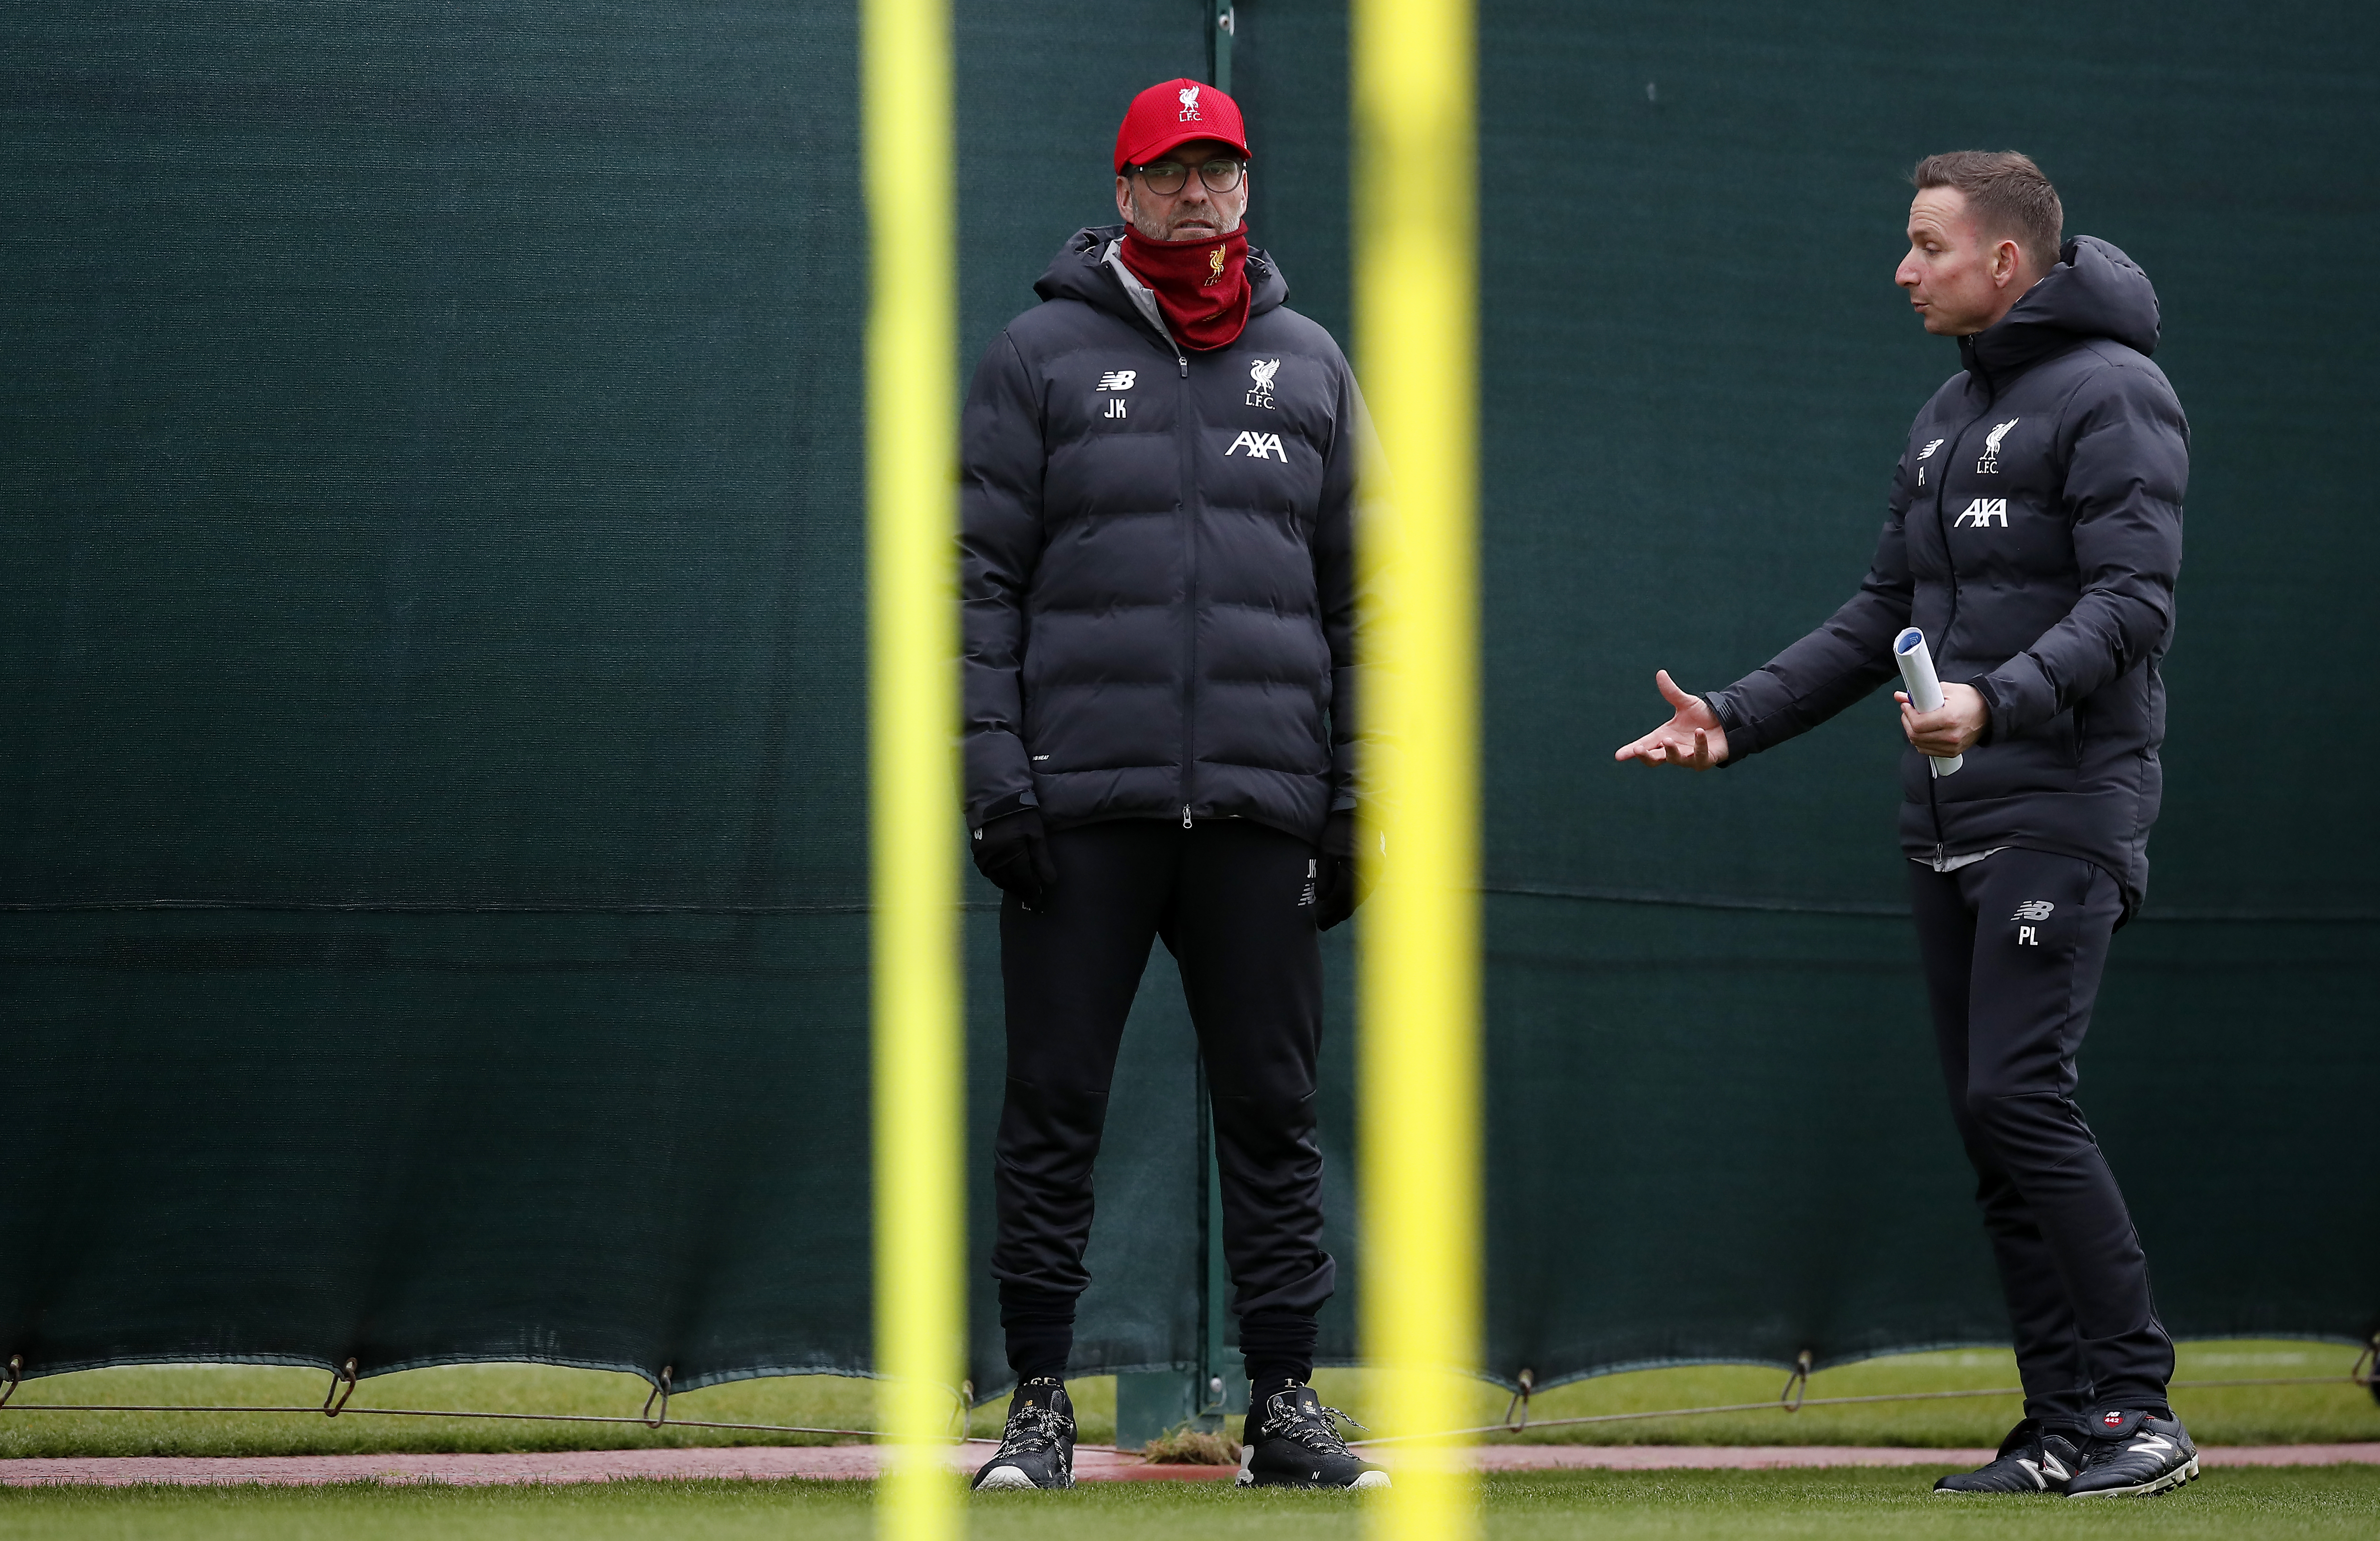 Liverpool manager Jurgen Klopp and assistant manager Pepijn Lijnders during the training session at Melwood, Liverpool.